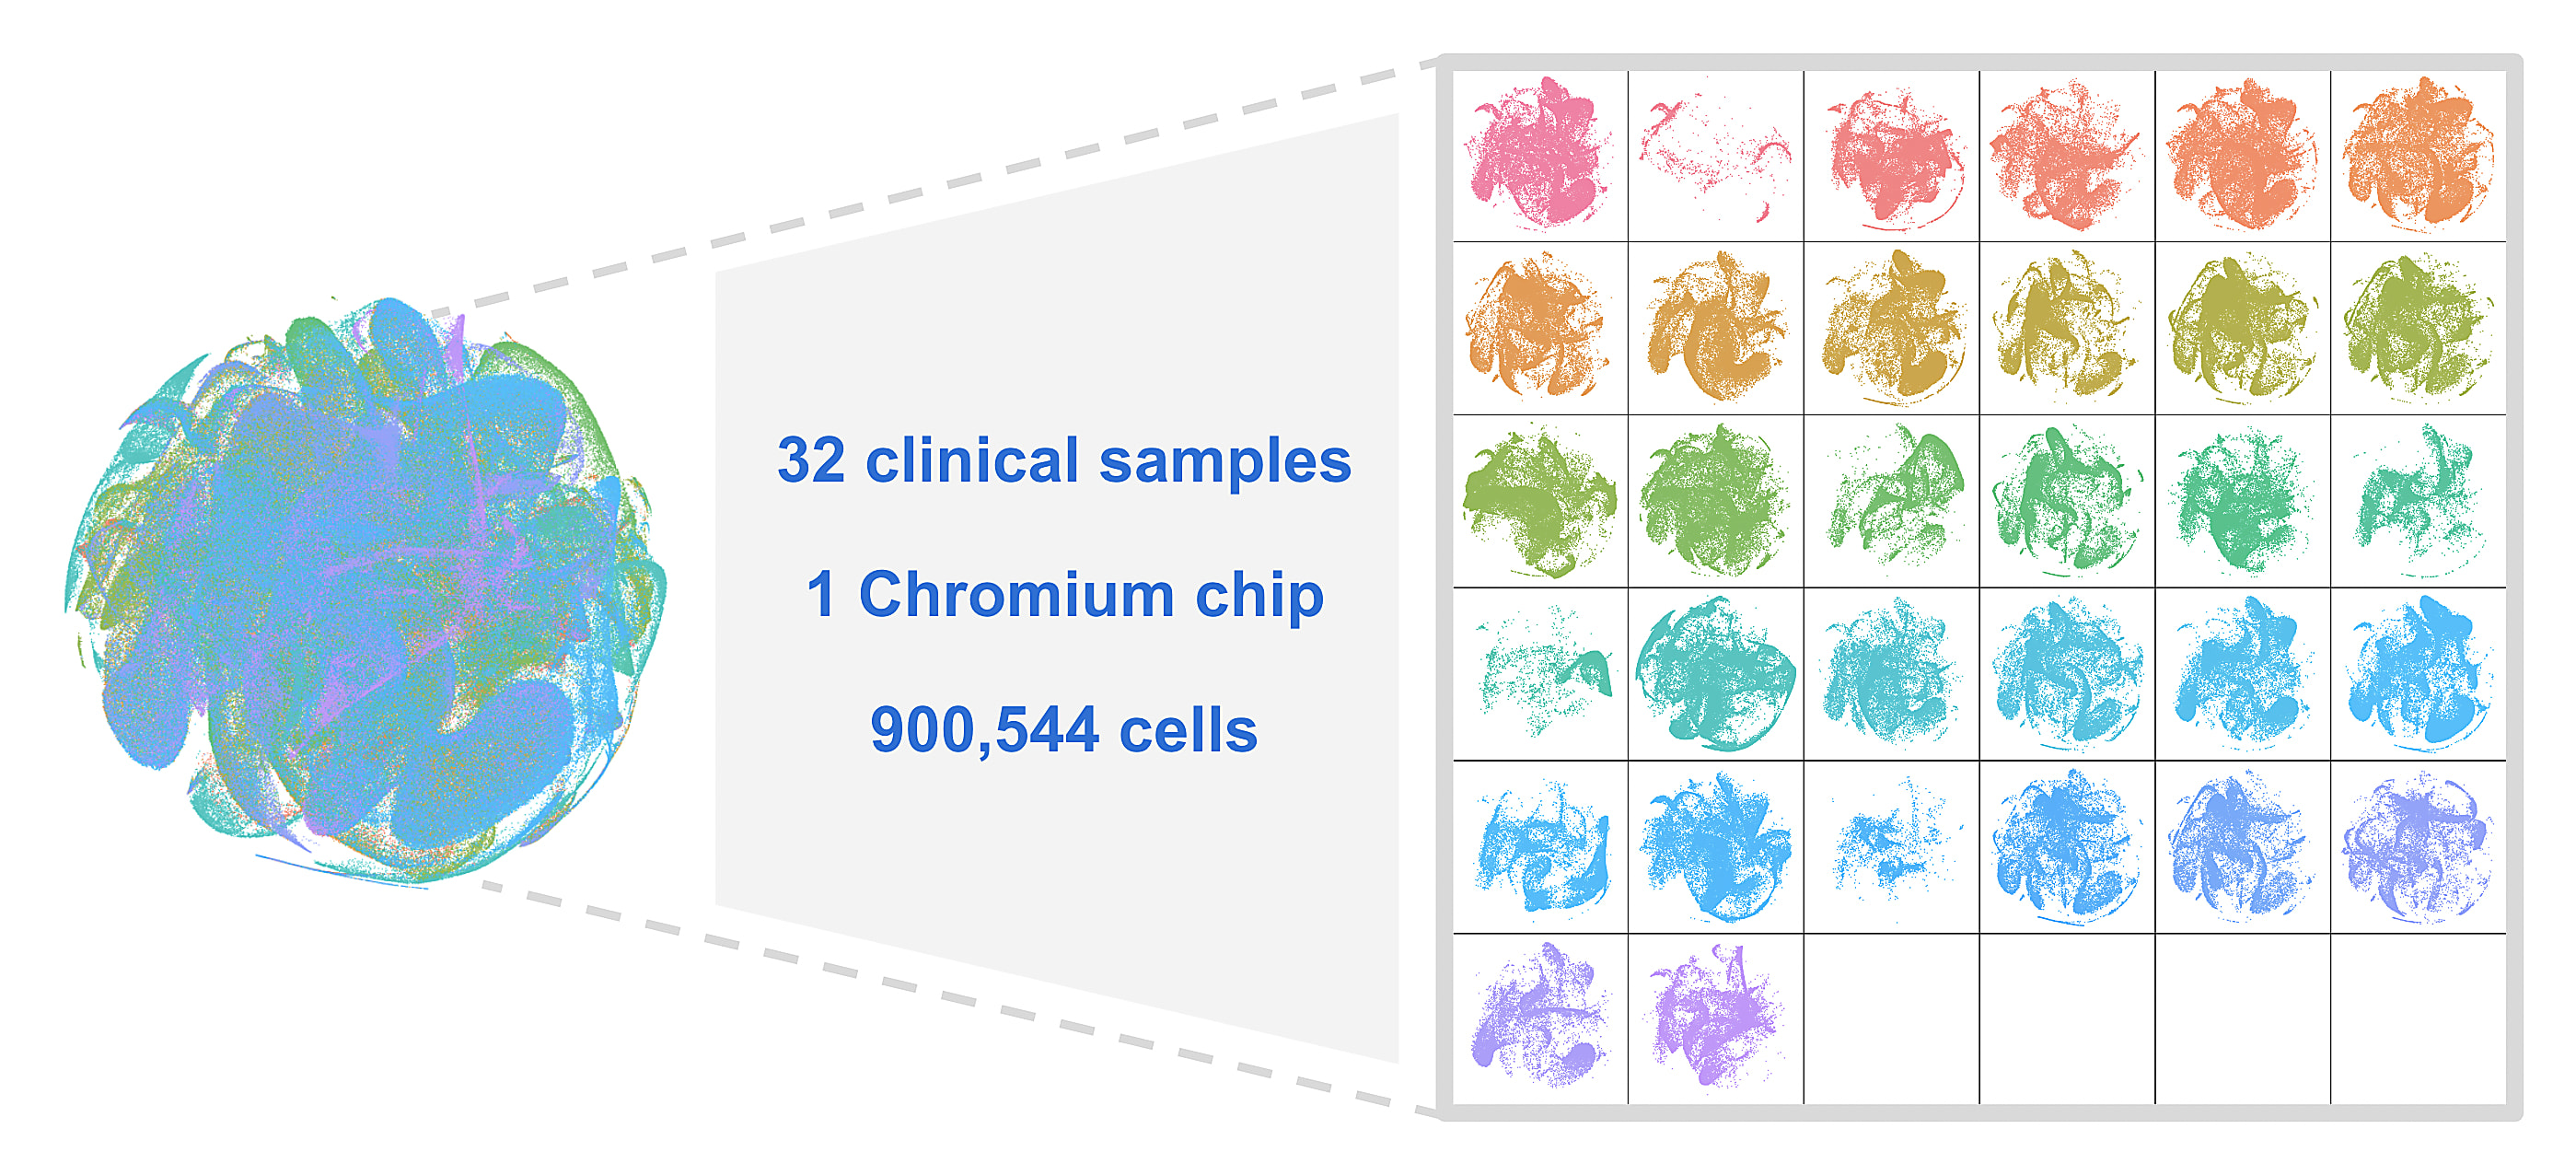 Chromium Single Cell Gene Expression Flex data from 32 clinical samples derived from lung tissues.